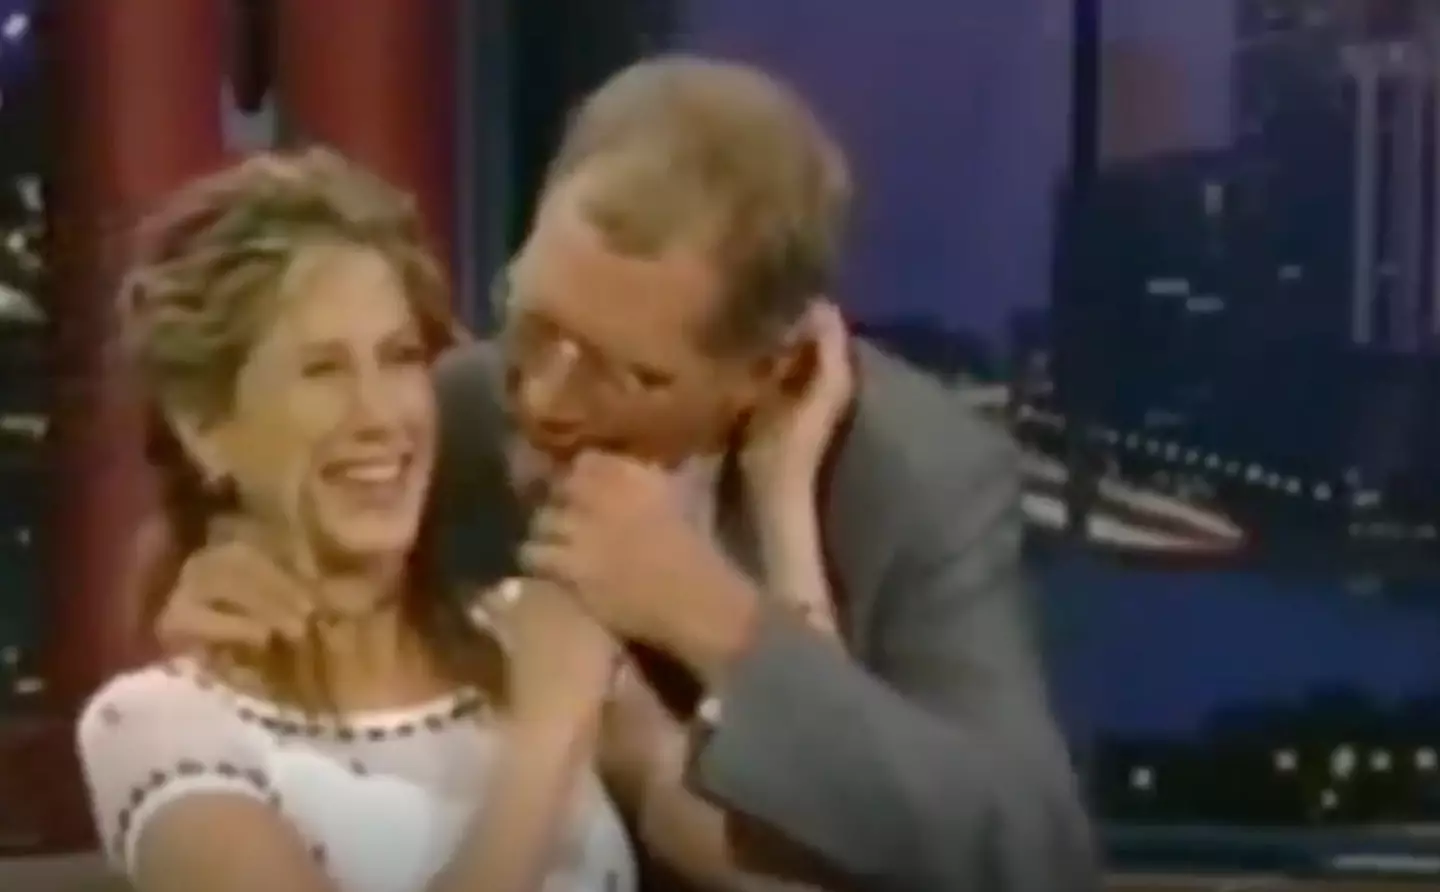 Jennifer Aniston was visibly uncomfortable during the 'creepy' encounter with David Letterman.